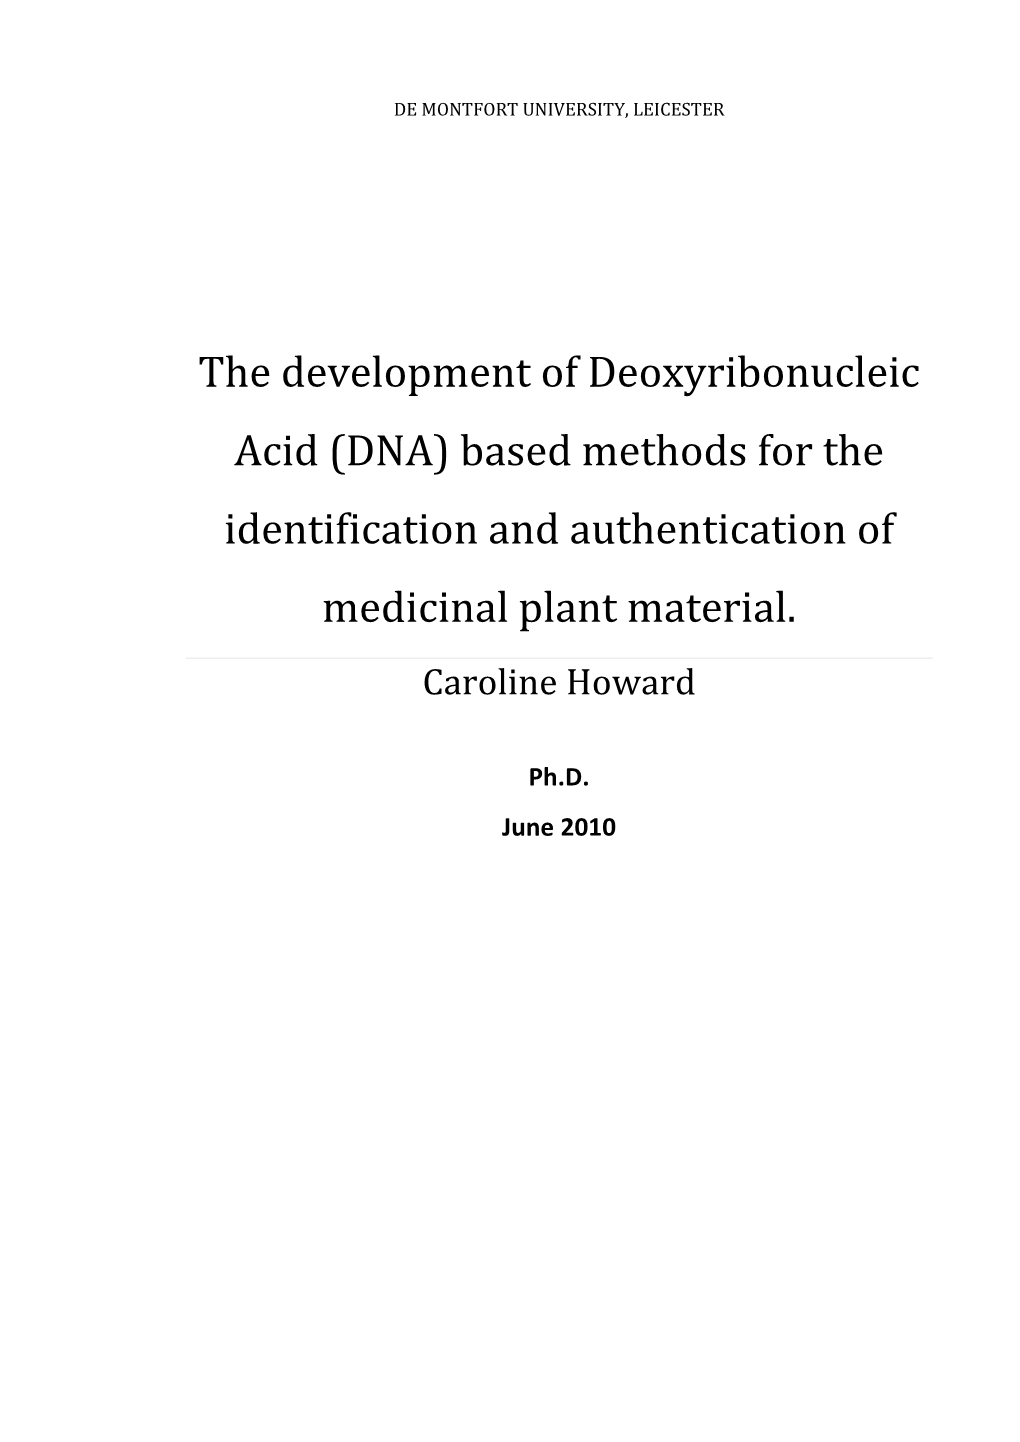 The Development of Deoxyribonucleic Acid (DNA) Based Methods for the Identification and Authentication of Medicinal Plant Material